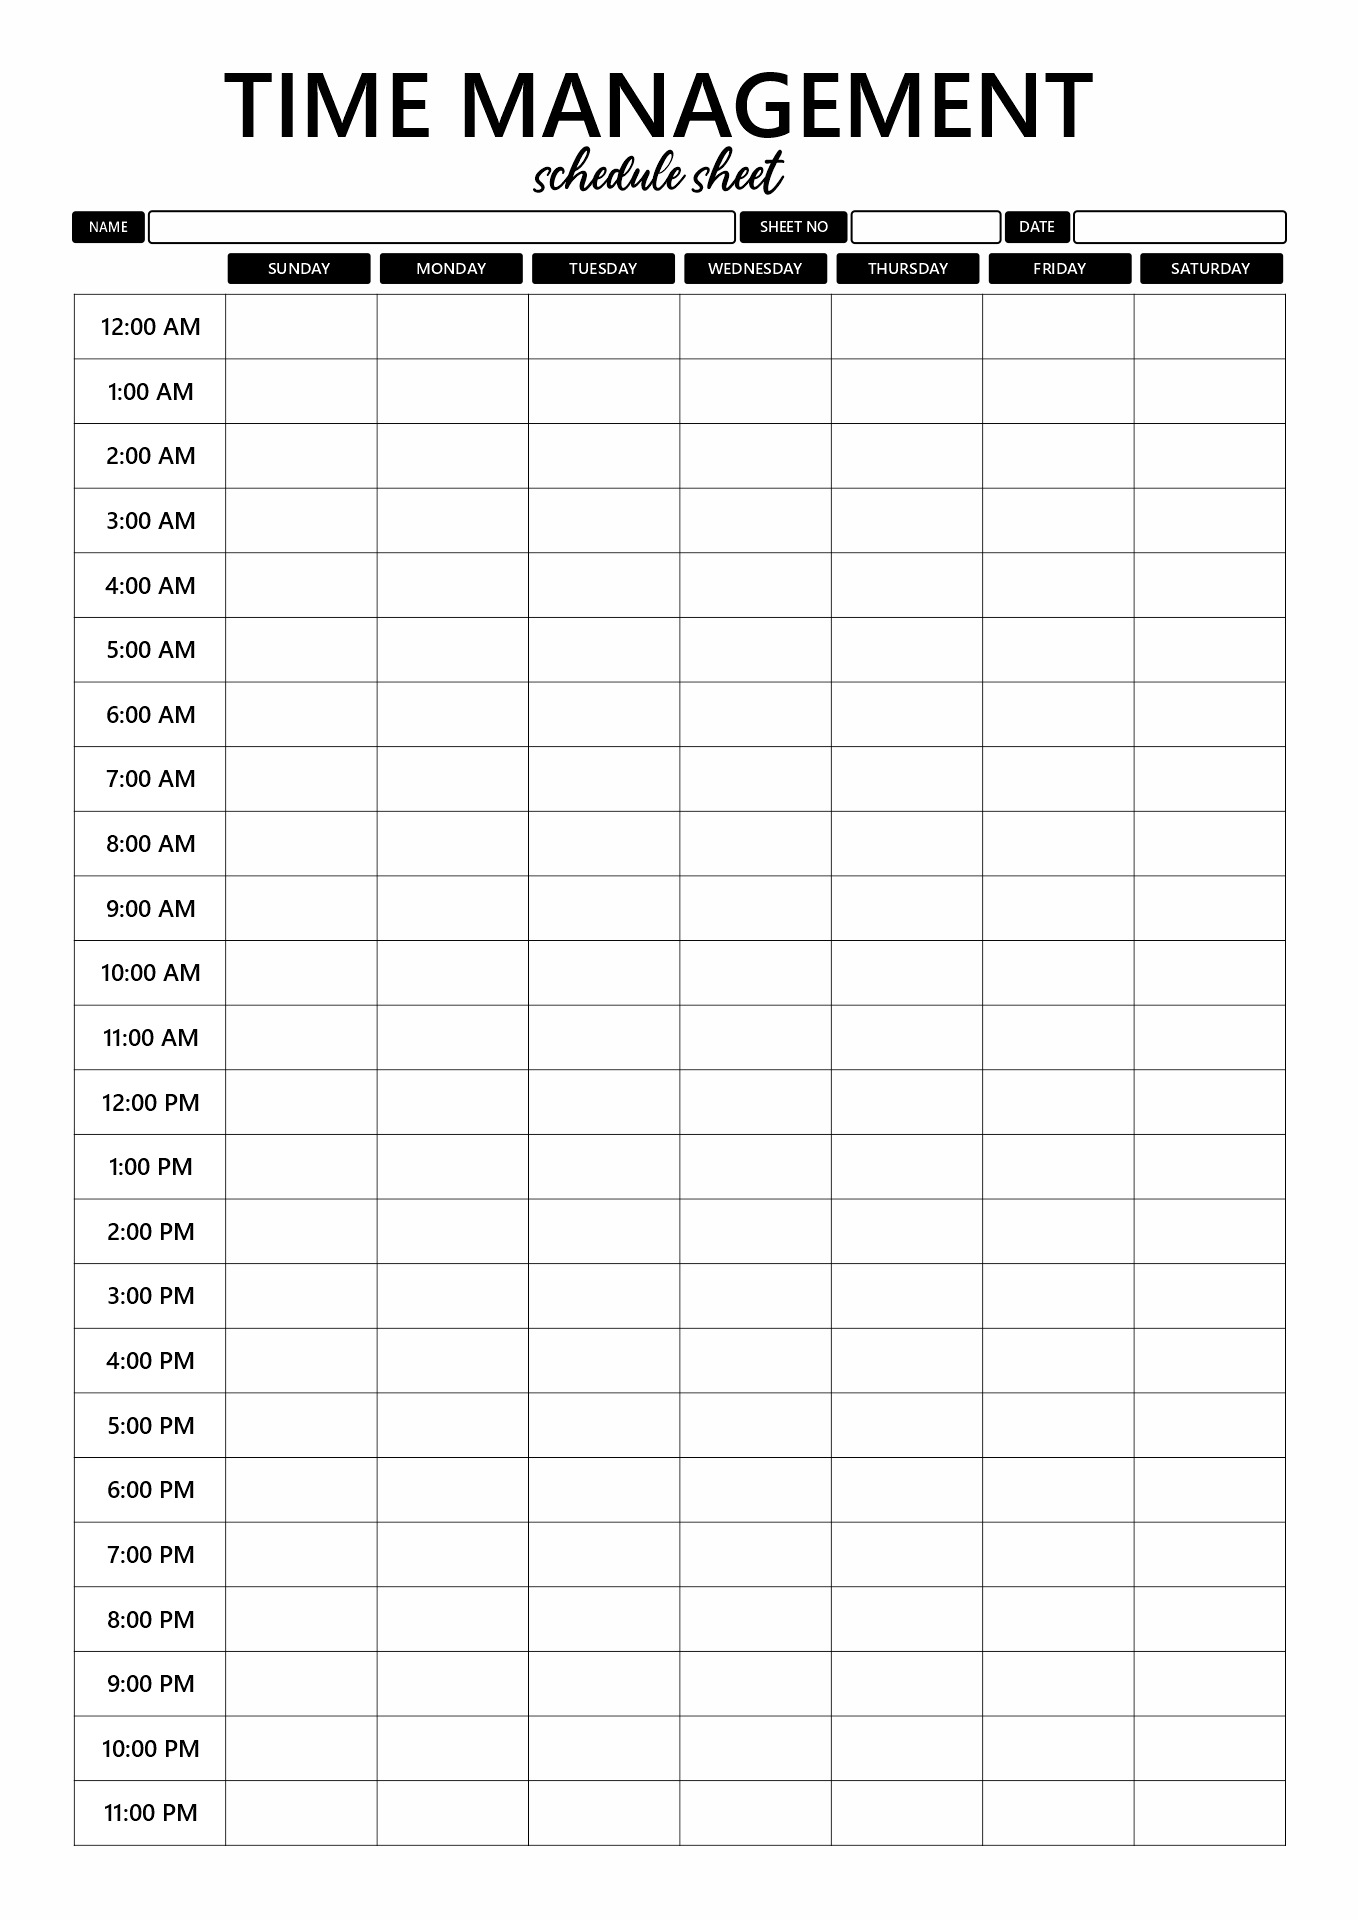 time management schedule template example